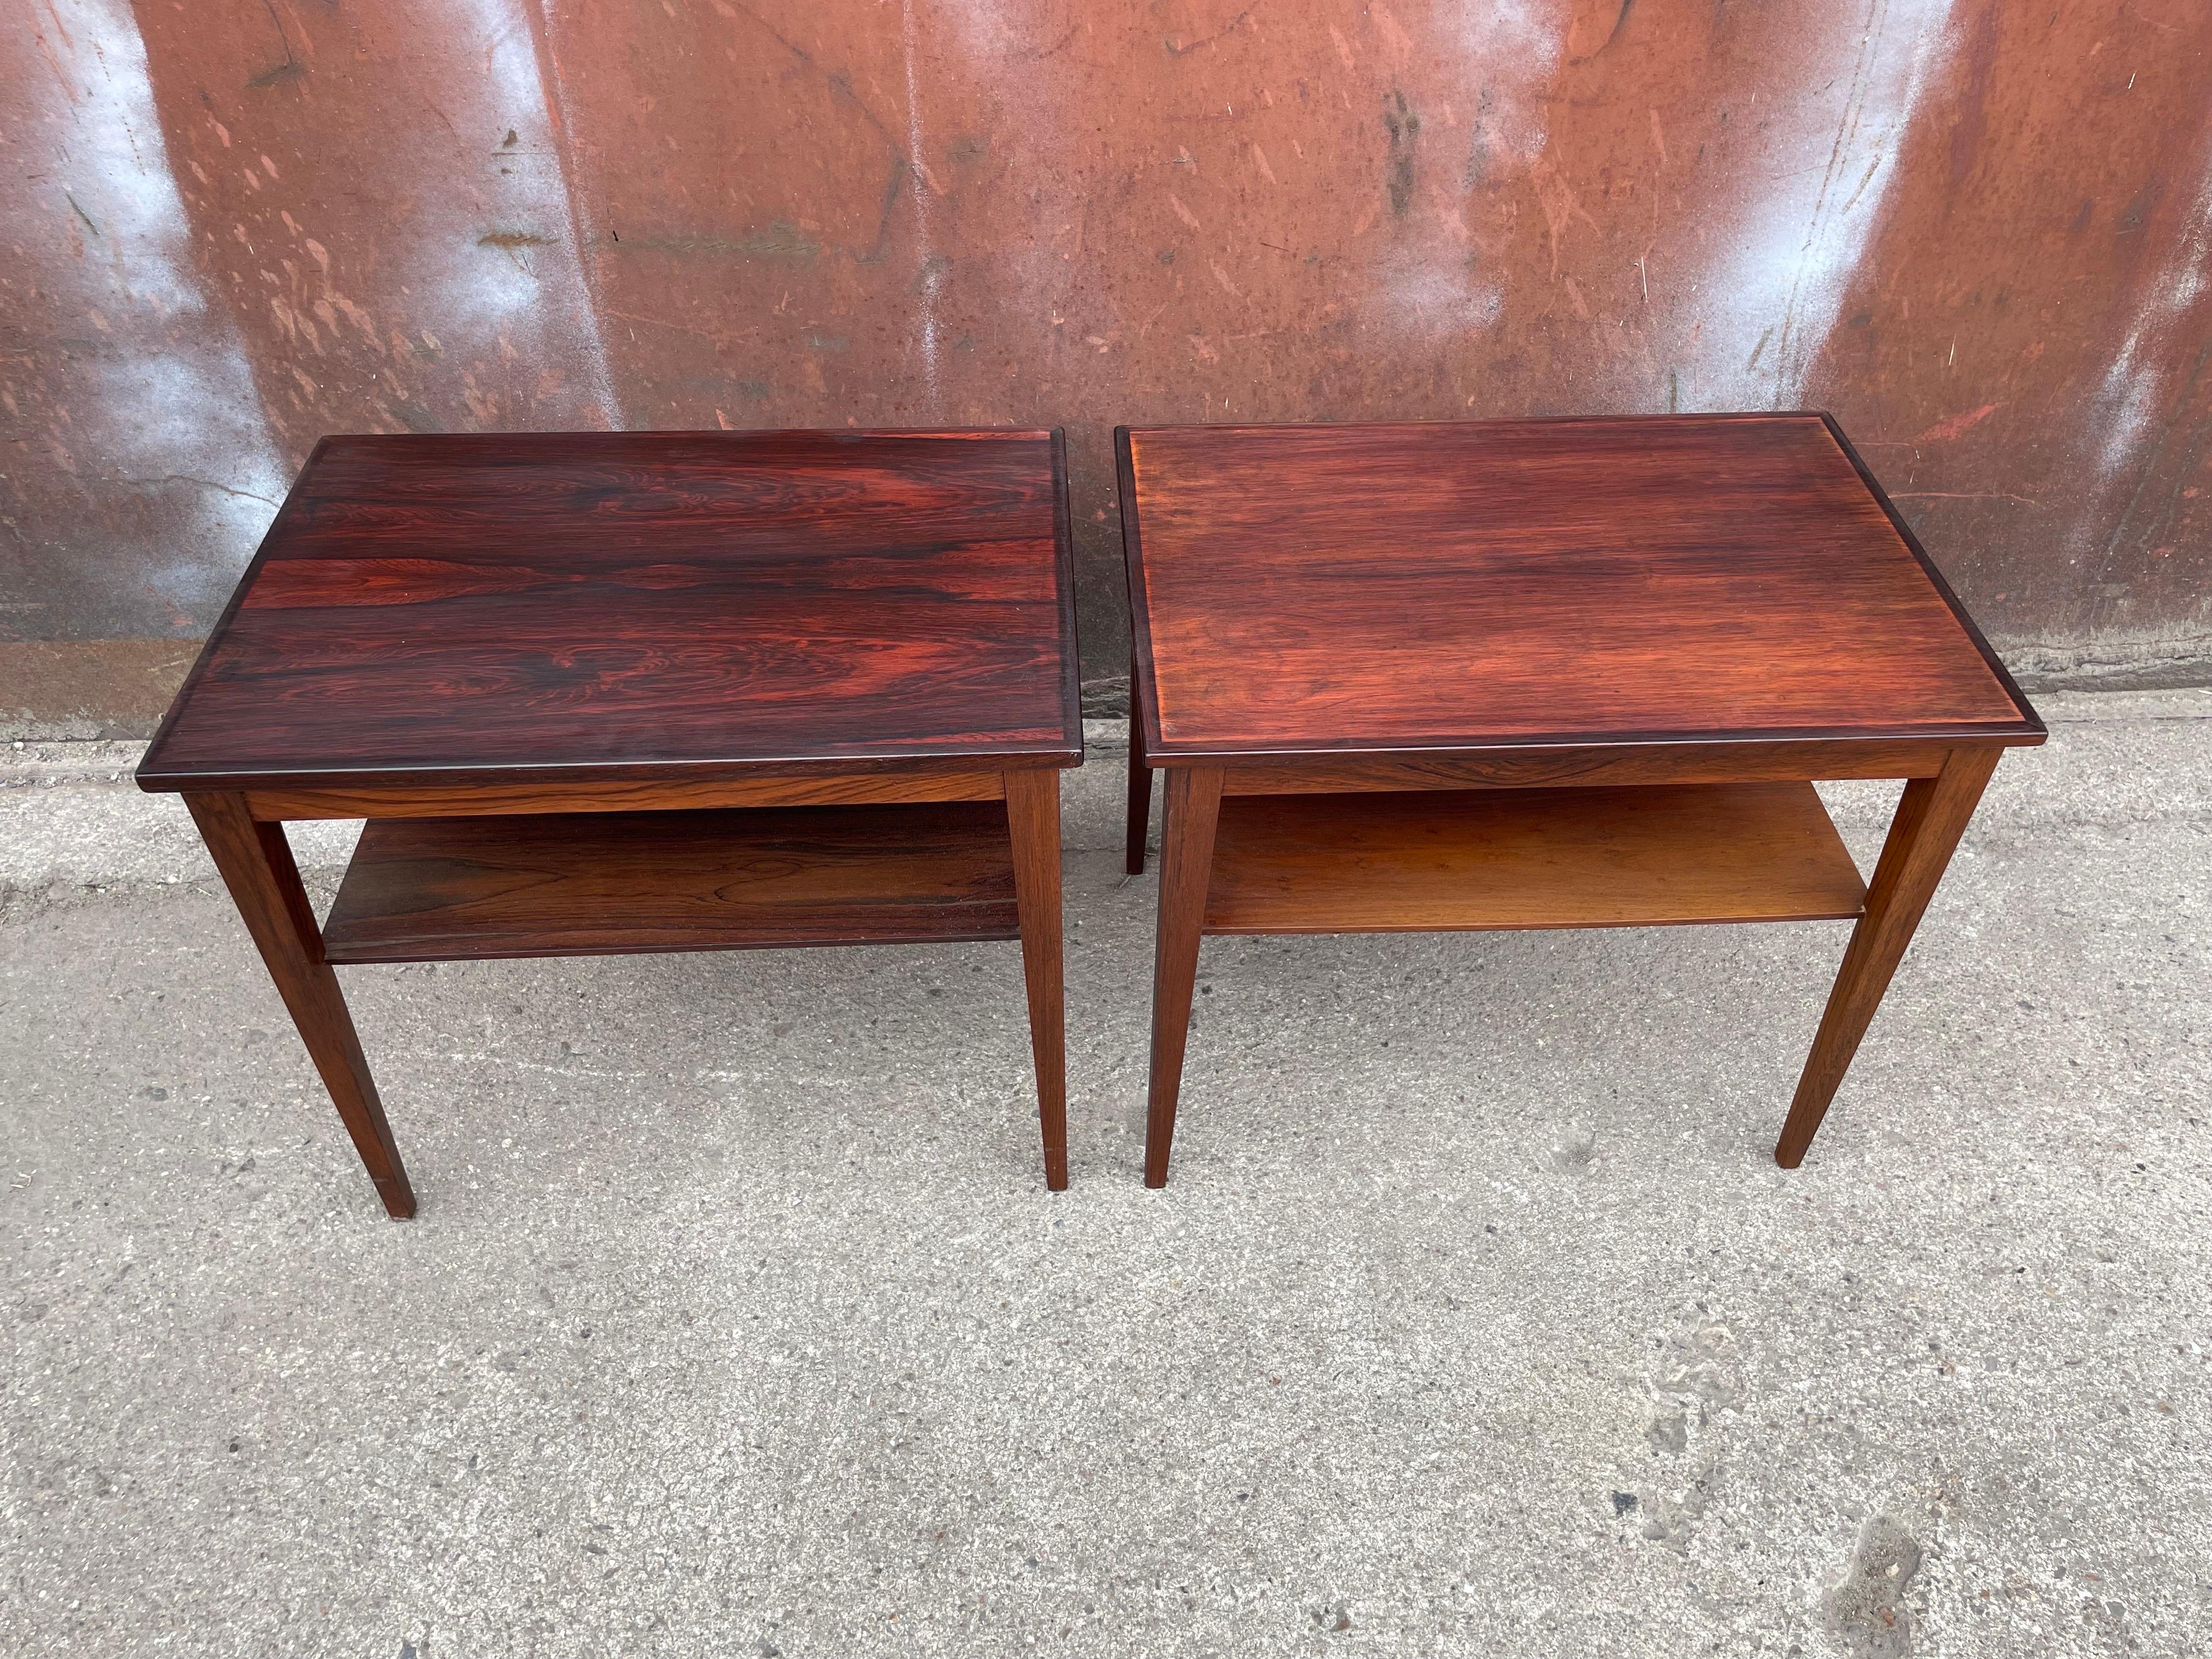 Pair of Danish Mid-Century Modern Nightstands or Sidetables from the, 1960s For Sale 2